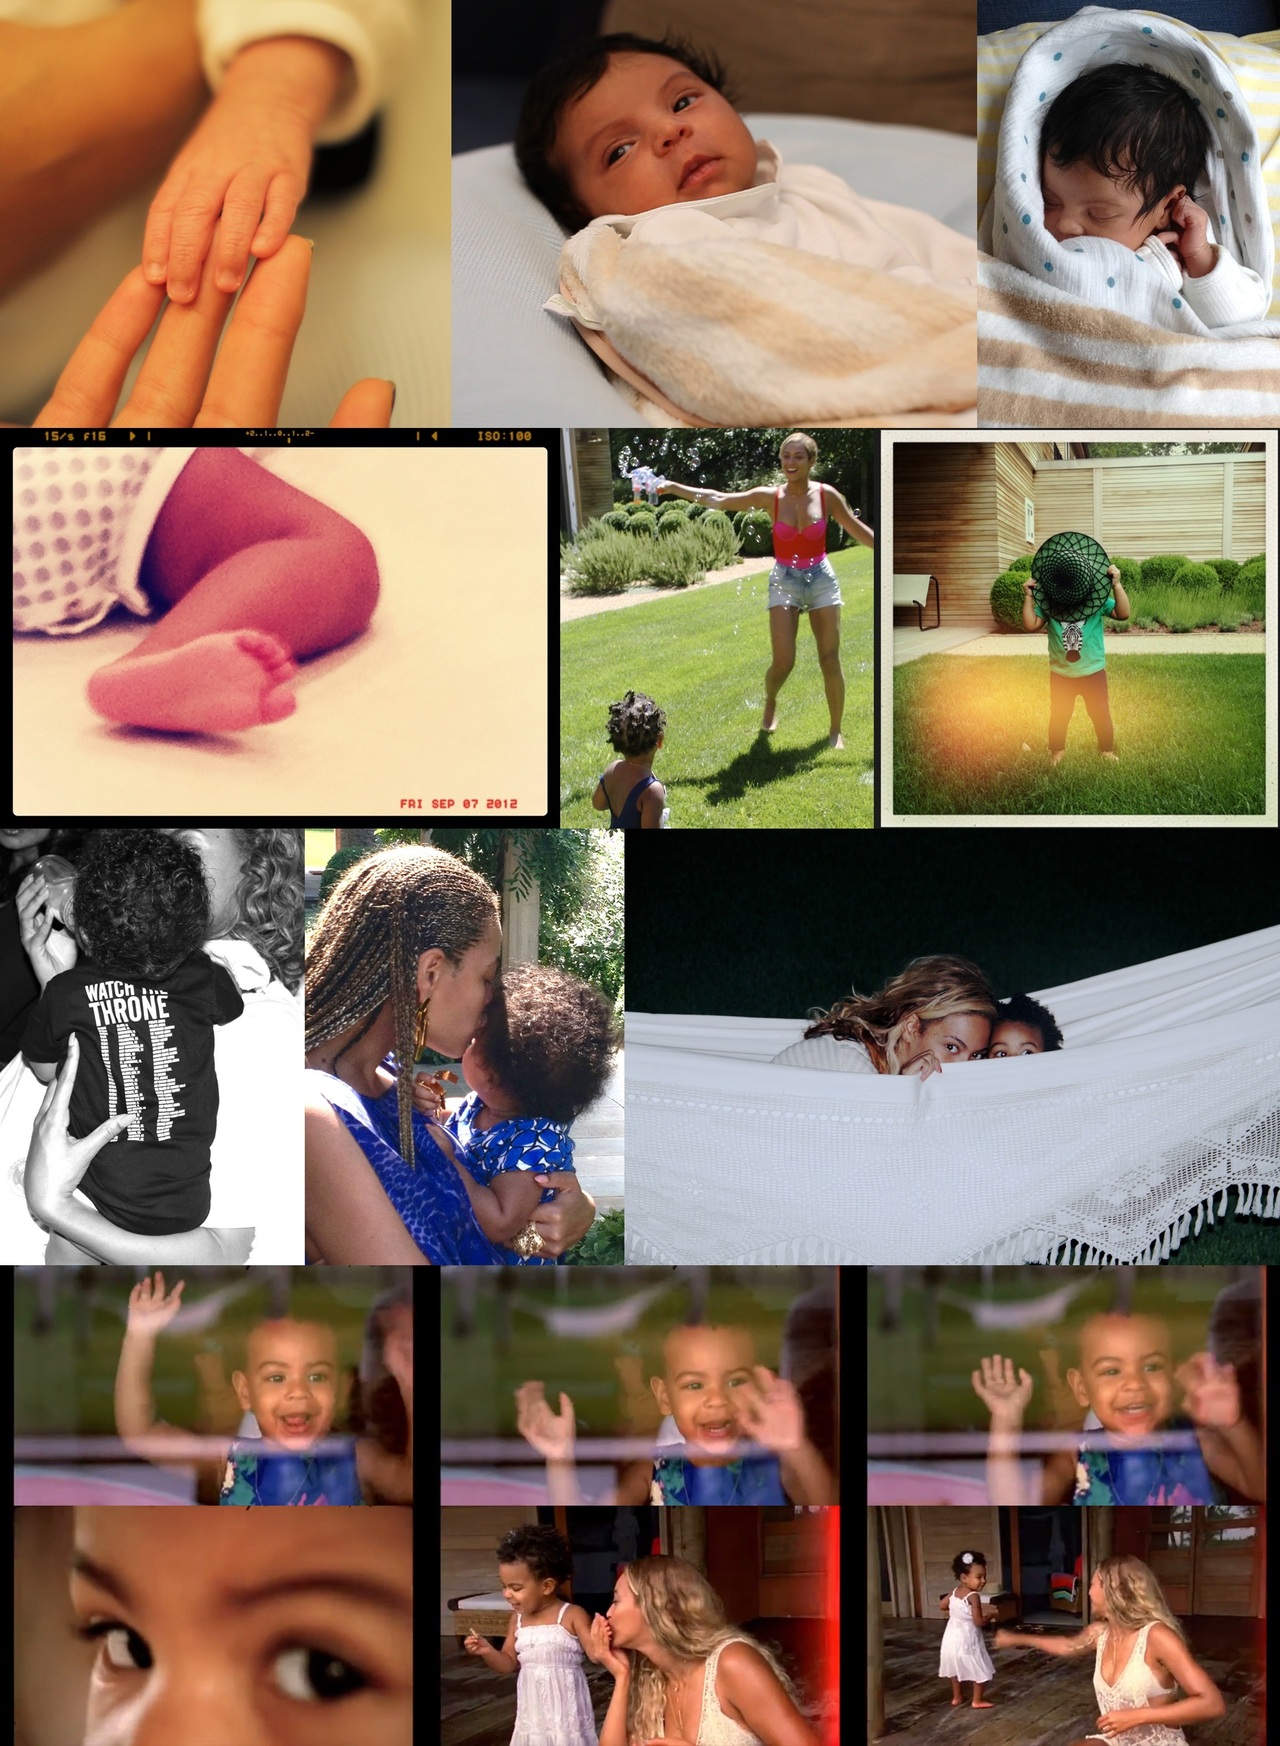 Beyoncé Commemorates Blue Ivy's 2nd Birthday with Fan Tumblr Blog1280 x 1746